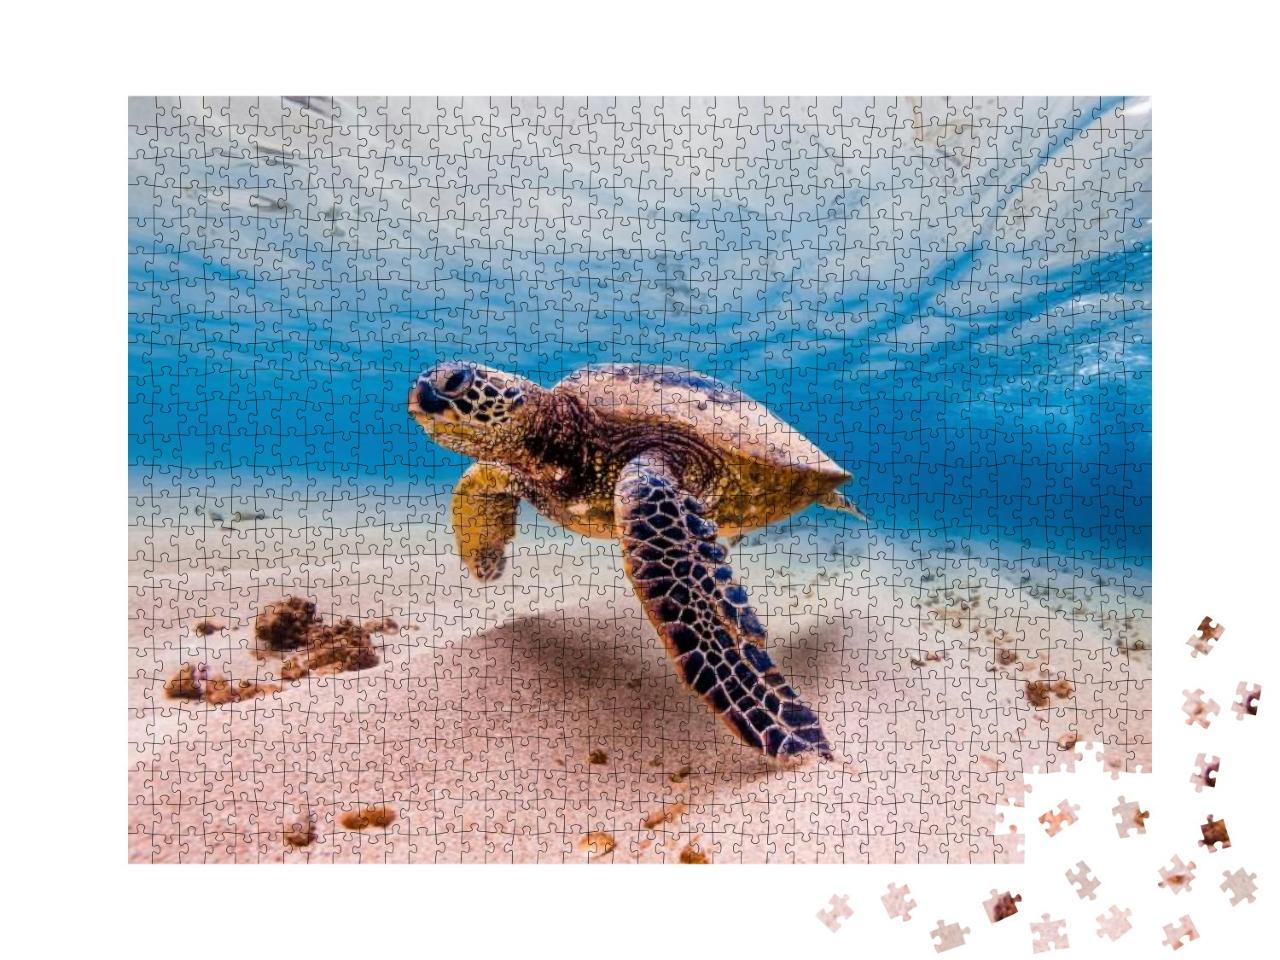 An Endangered Hawaiian Green Sea Turtle Cruises in the Wa... Jigsaw Puzzle with 1000 pieces